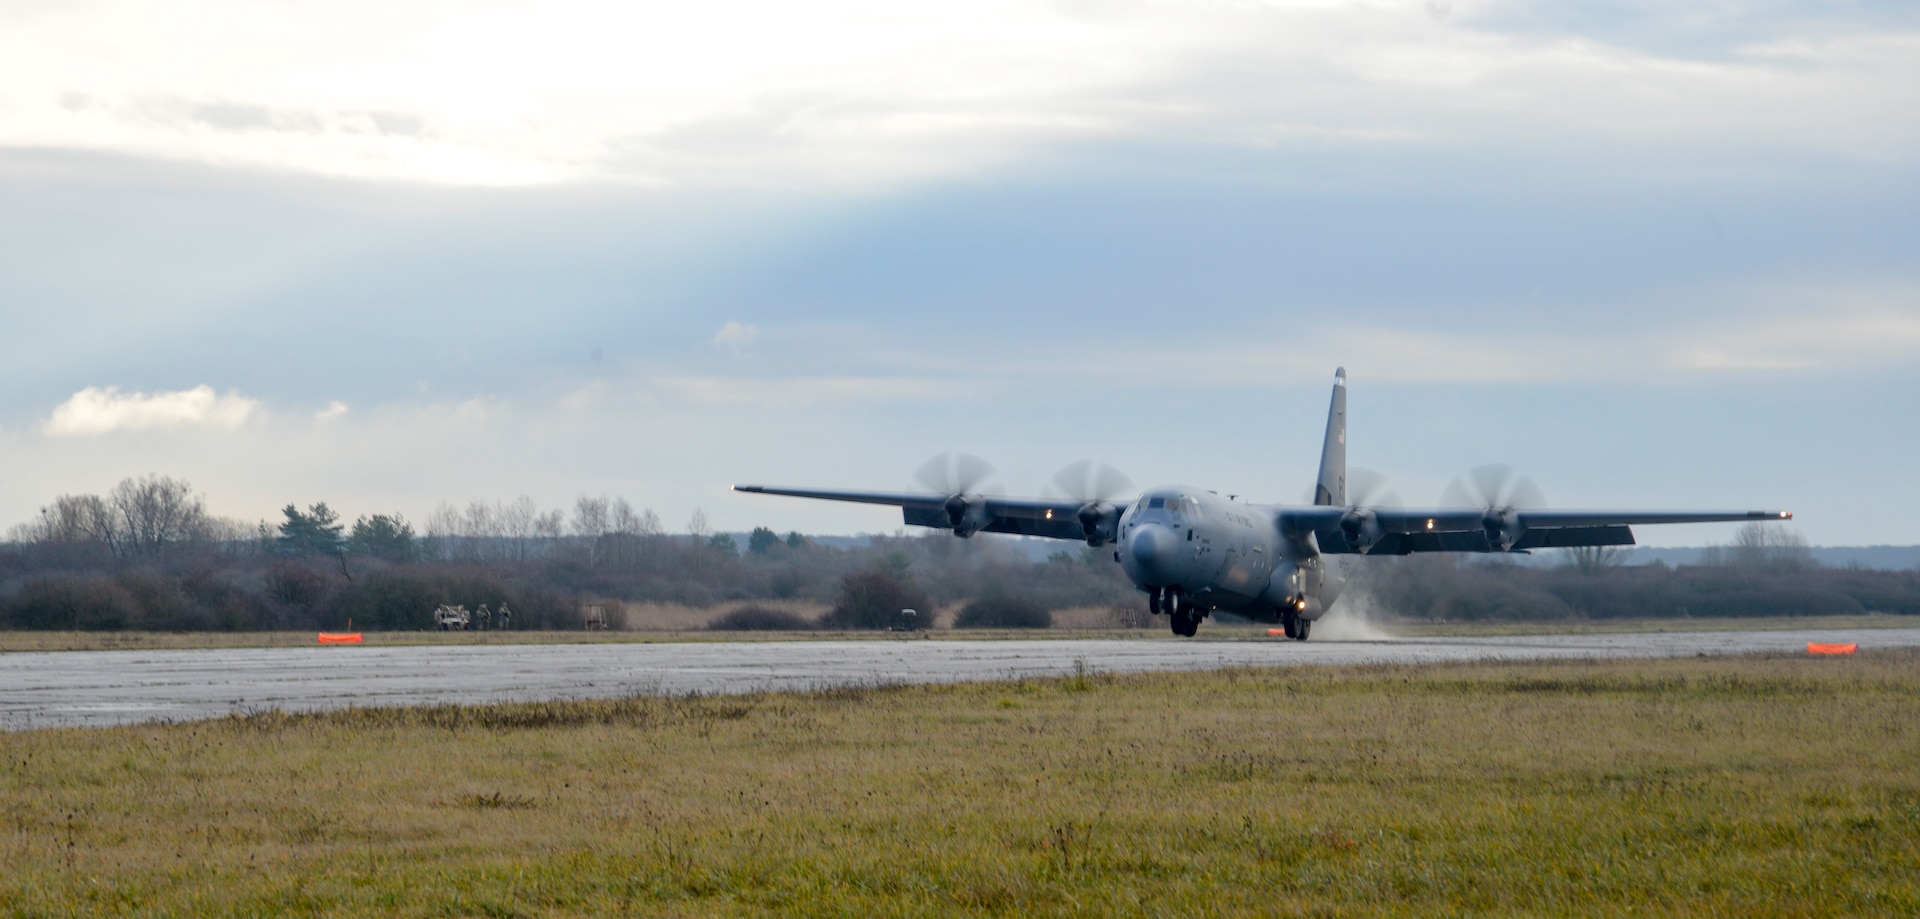 A C-130J Super Hercules aircraft assigned to the 37th Airlift Squadron, 86th Airlift Wing, Ramstein Air Base, Germany, lands on a runway during exercise Contested Forge on Grostenquin Air Base, France, Dec. 4, 2018. Contested Forge is an annual exercise that tests the 435th Contingency Response Group’s ability to build a forward operating base and conduct airfield operations in an austere environment, friendly or hostile. (U.S. Air Force photo by Staff Sgt. Timothy Moore)